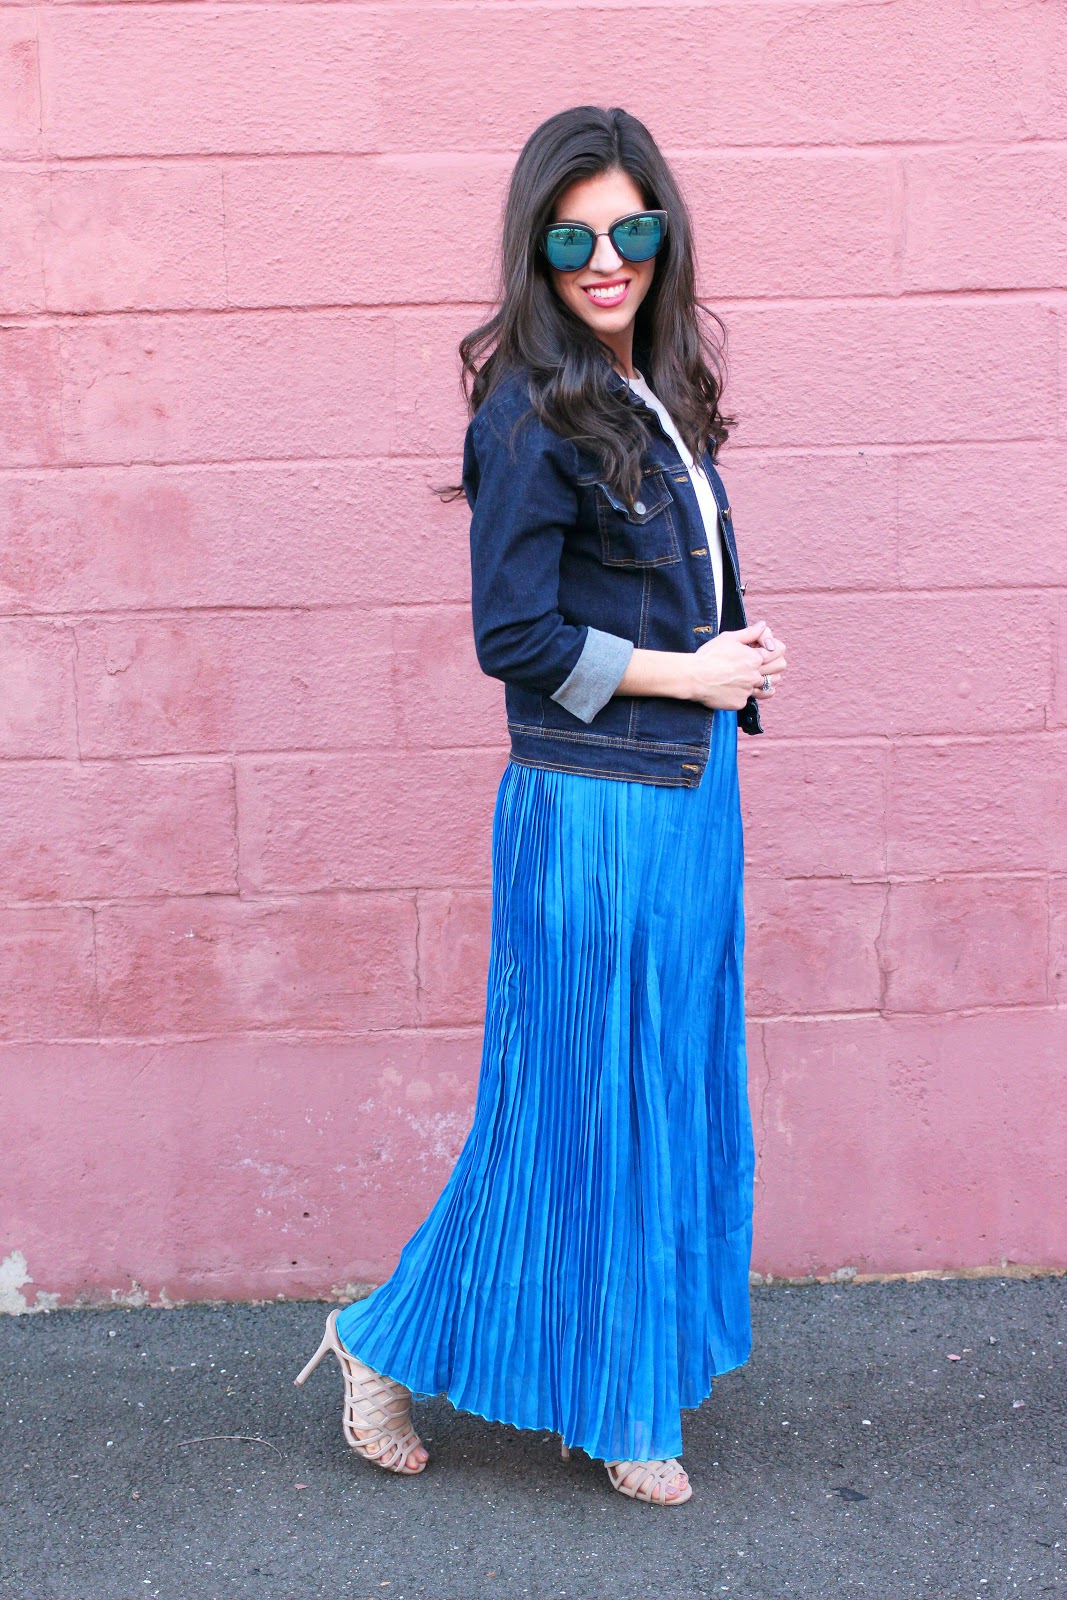 Blue Denim Jacket with Black Maxi Skirt Outfits (2 ideas & outfits) |  Lookastic